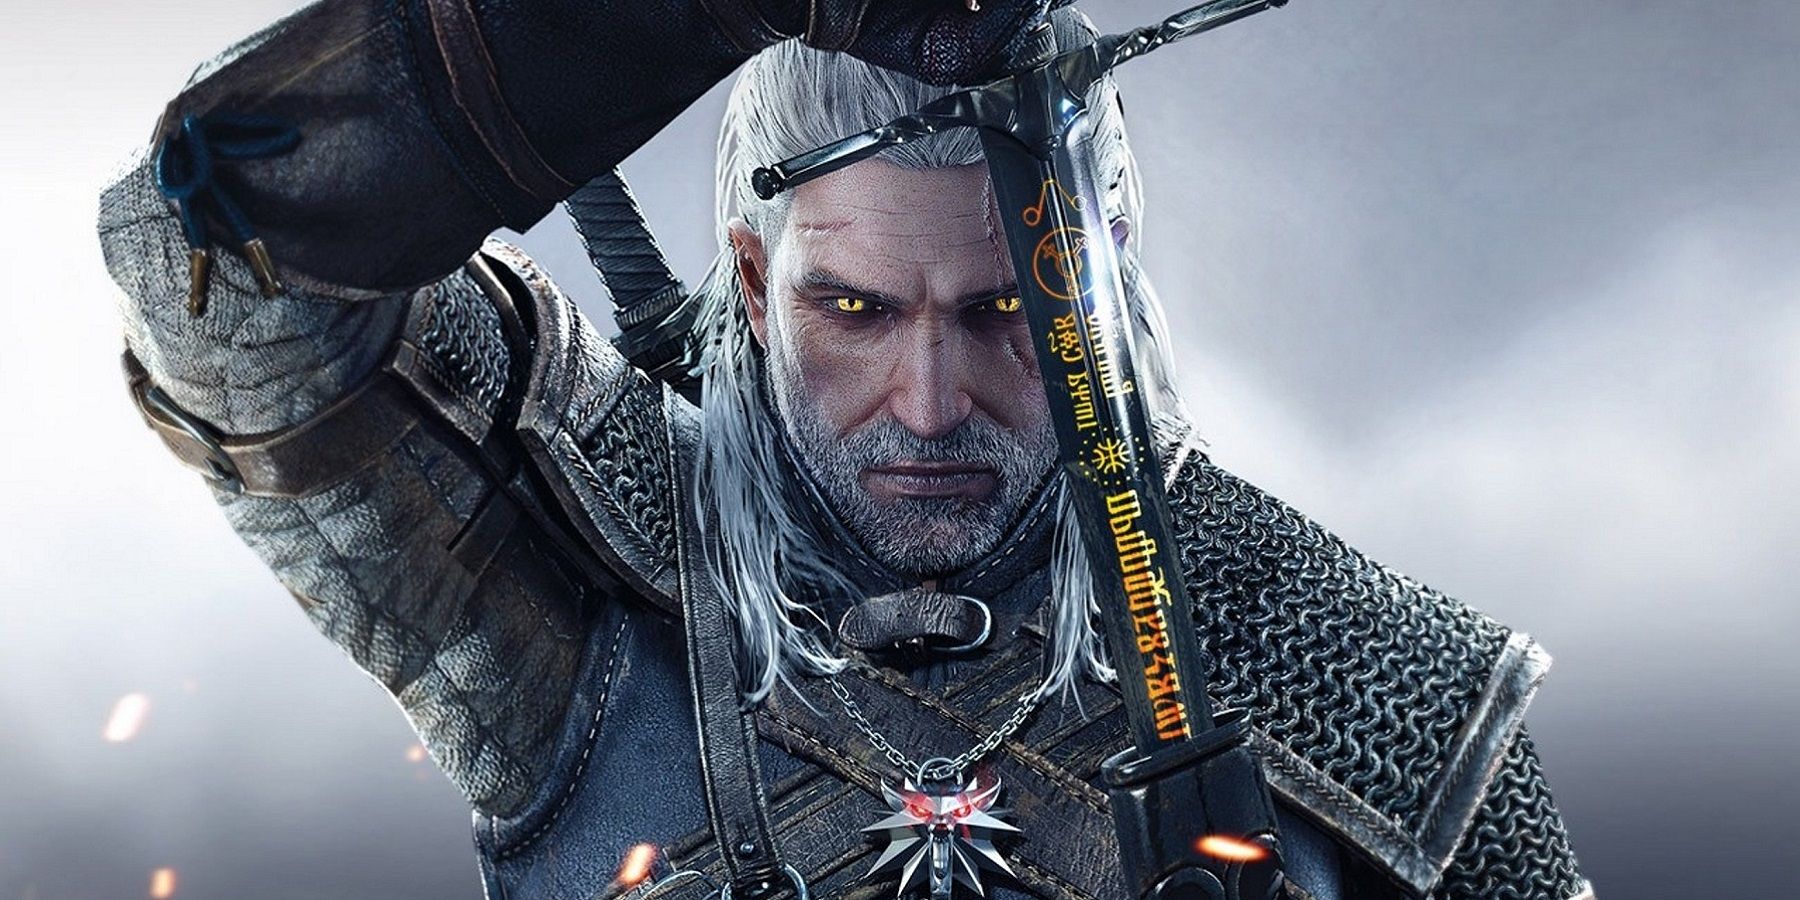 Image from The Witcher 3: Wild Hunt showing Geralt of Rivia unsheathing his sword.